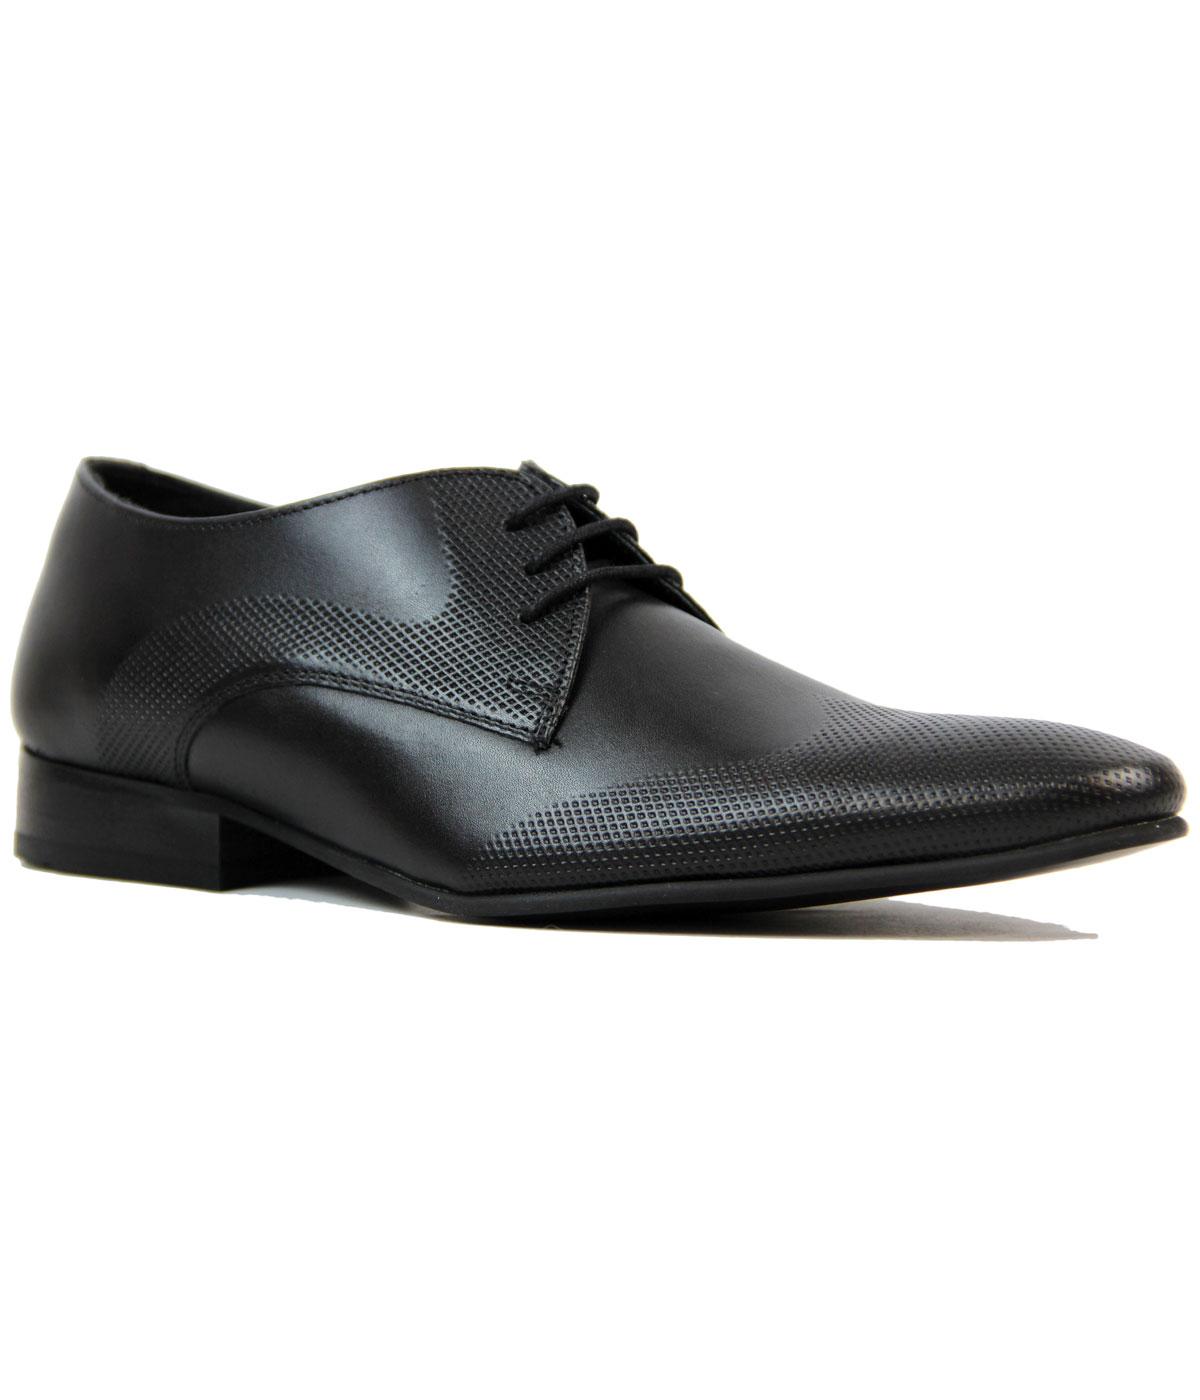 IKON Jackson Retro 60s Mod Pin Punch Wingtip Derby Shoes in Black